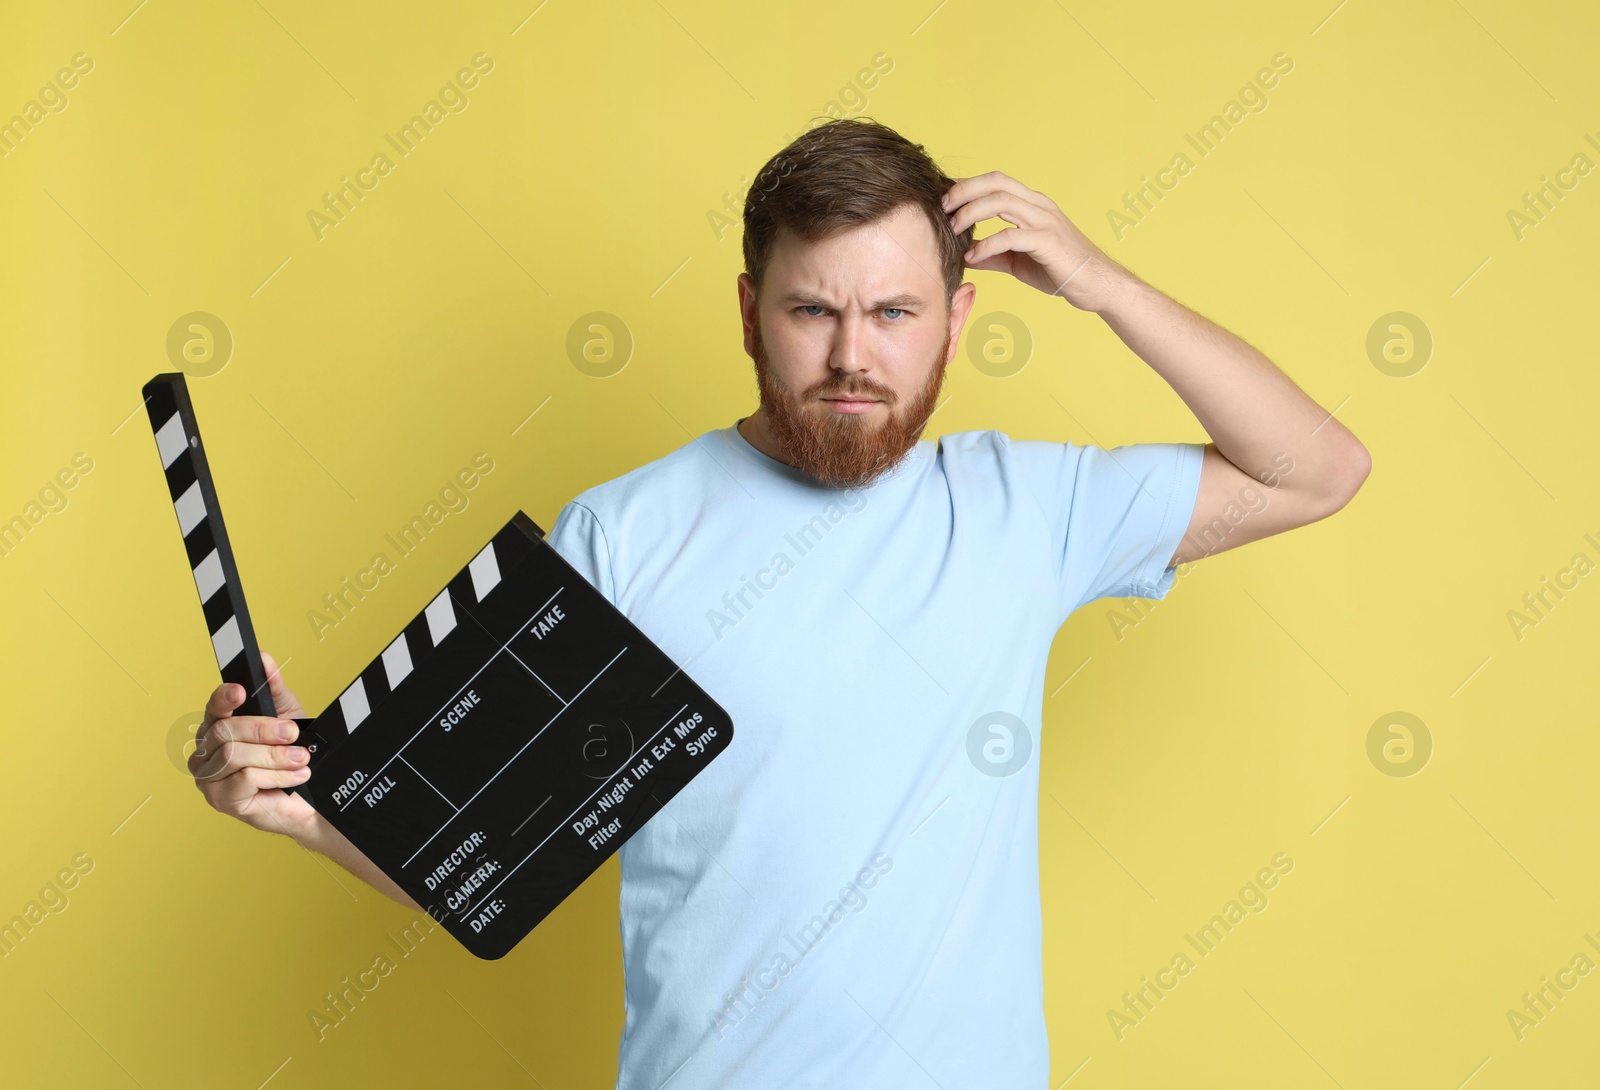 Photo of Making movie. Thoughtful man with clapperboard on yellow background